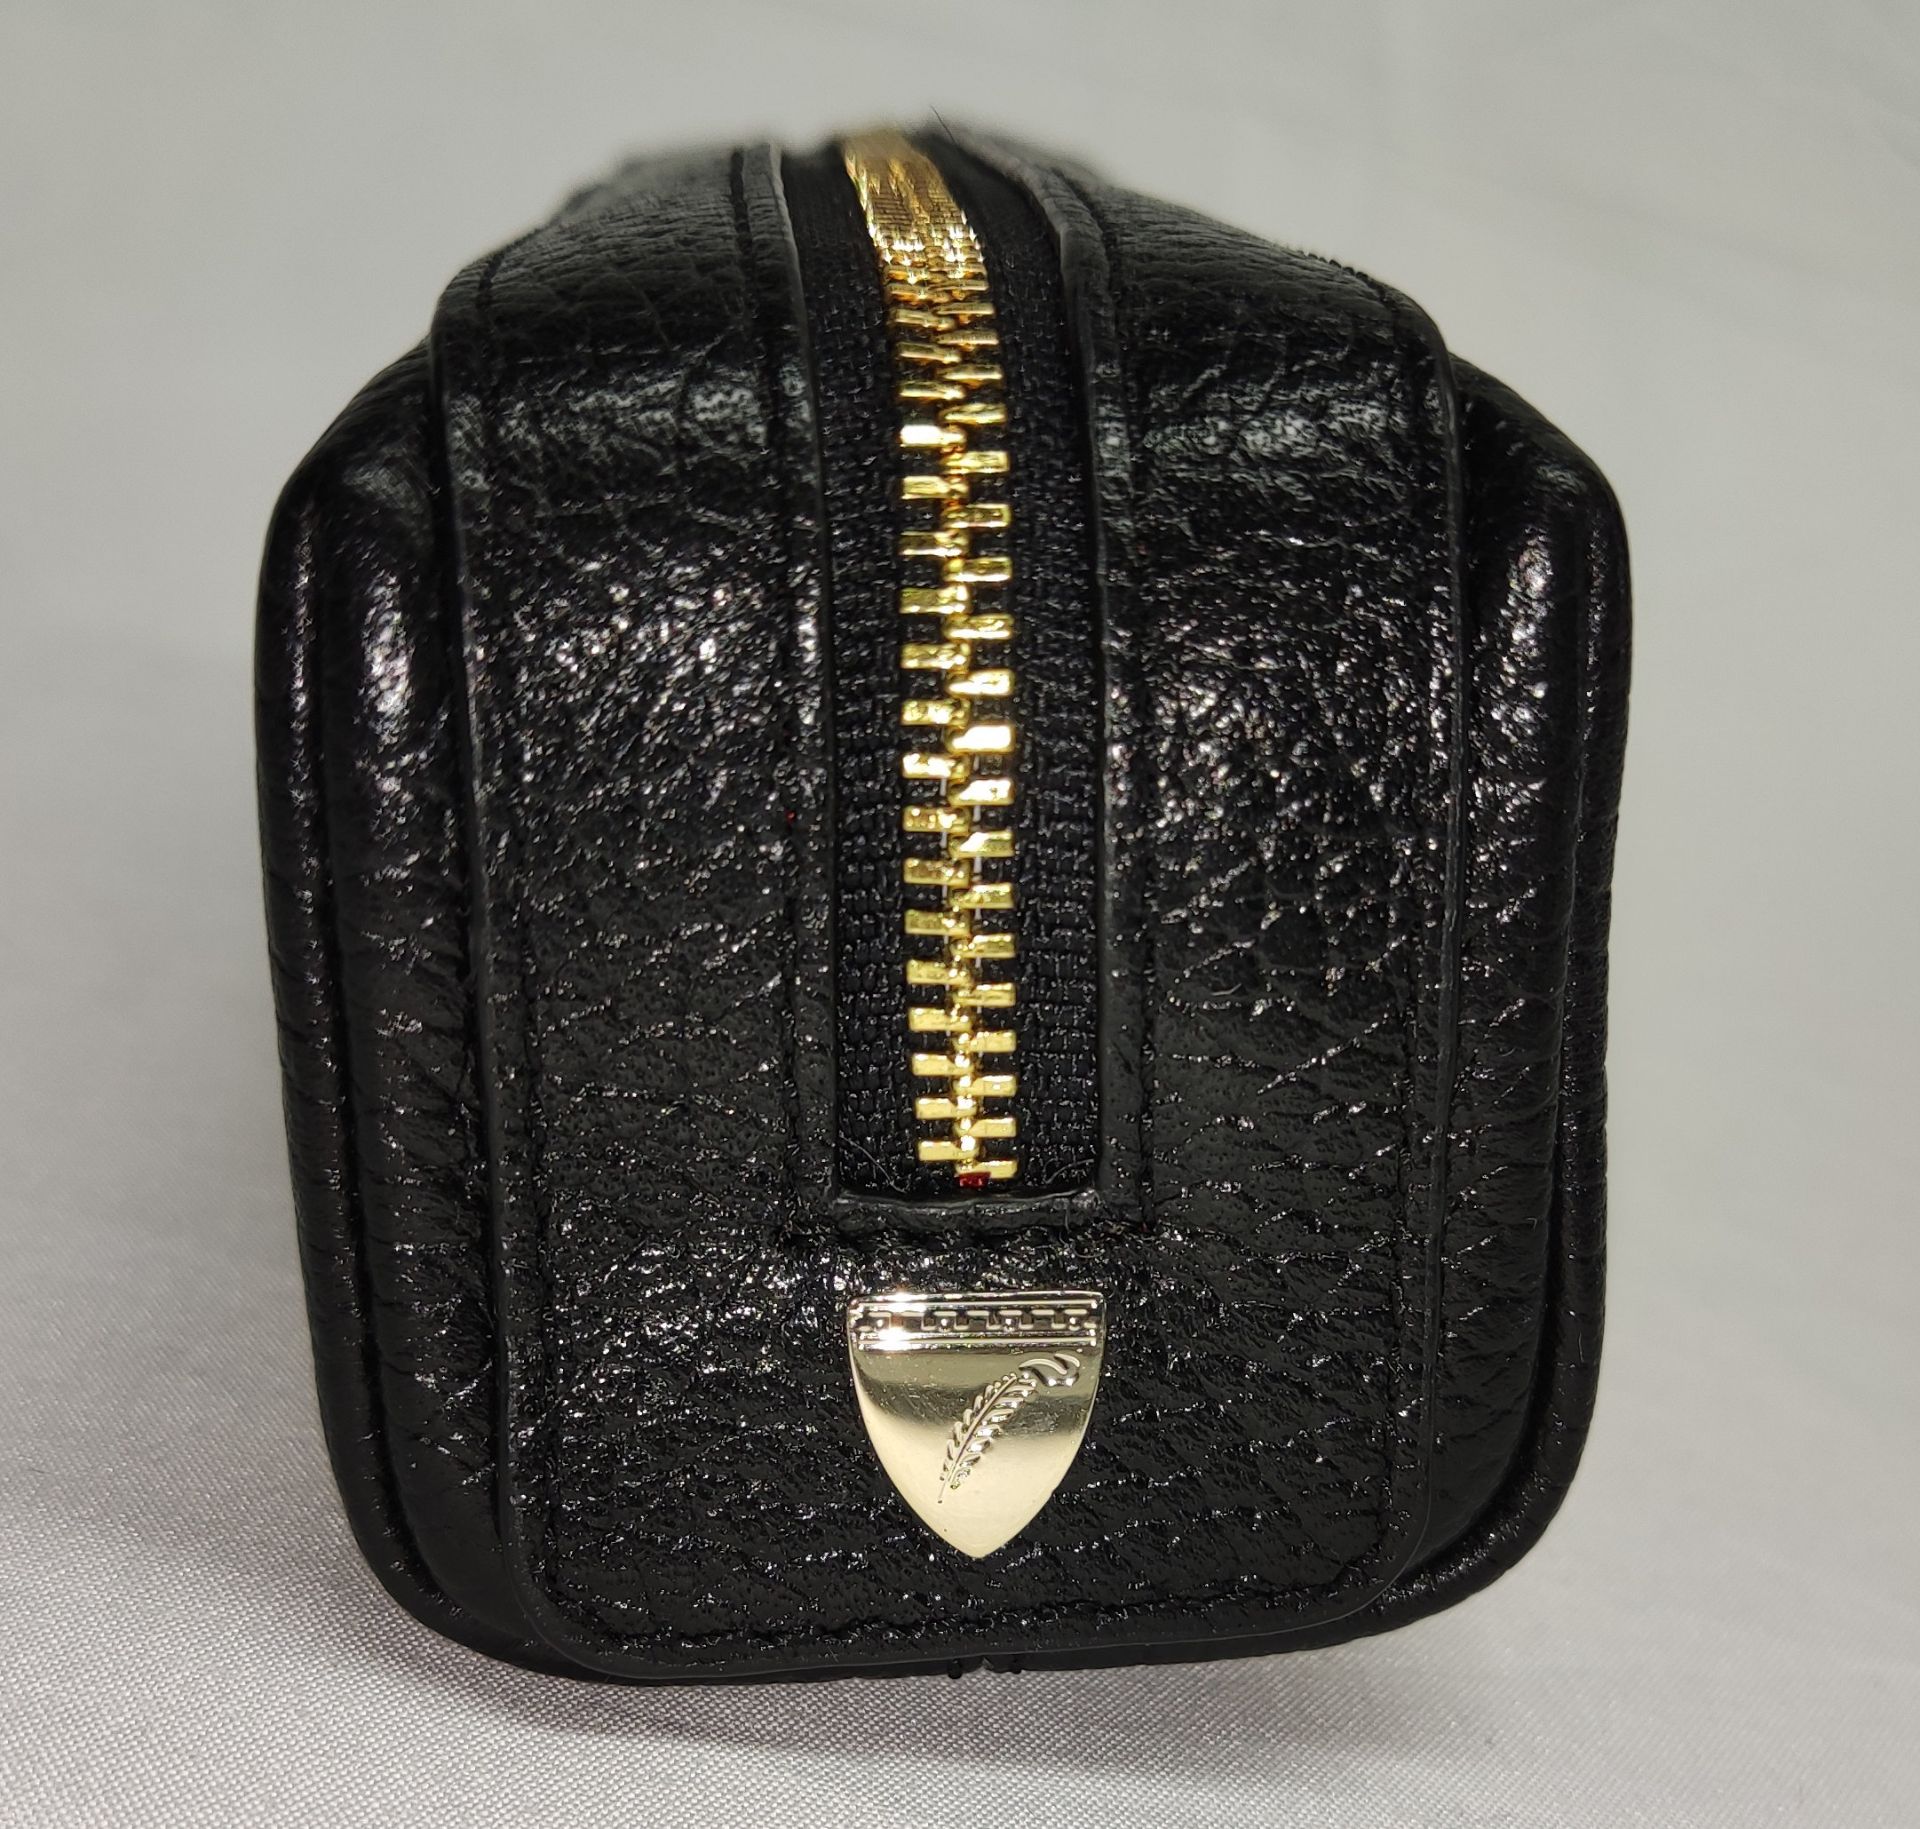 1 x ASPINAL OF LONDON Small London Case In Black Pebble - Boxed - Original RRP £75 - Ref: 6852686/ - Image 4 of 14